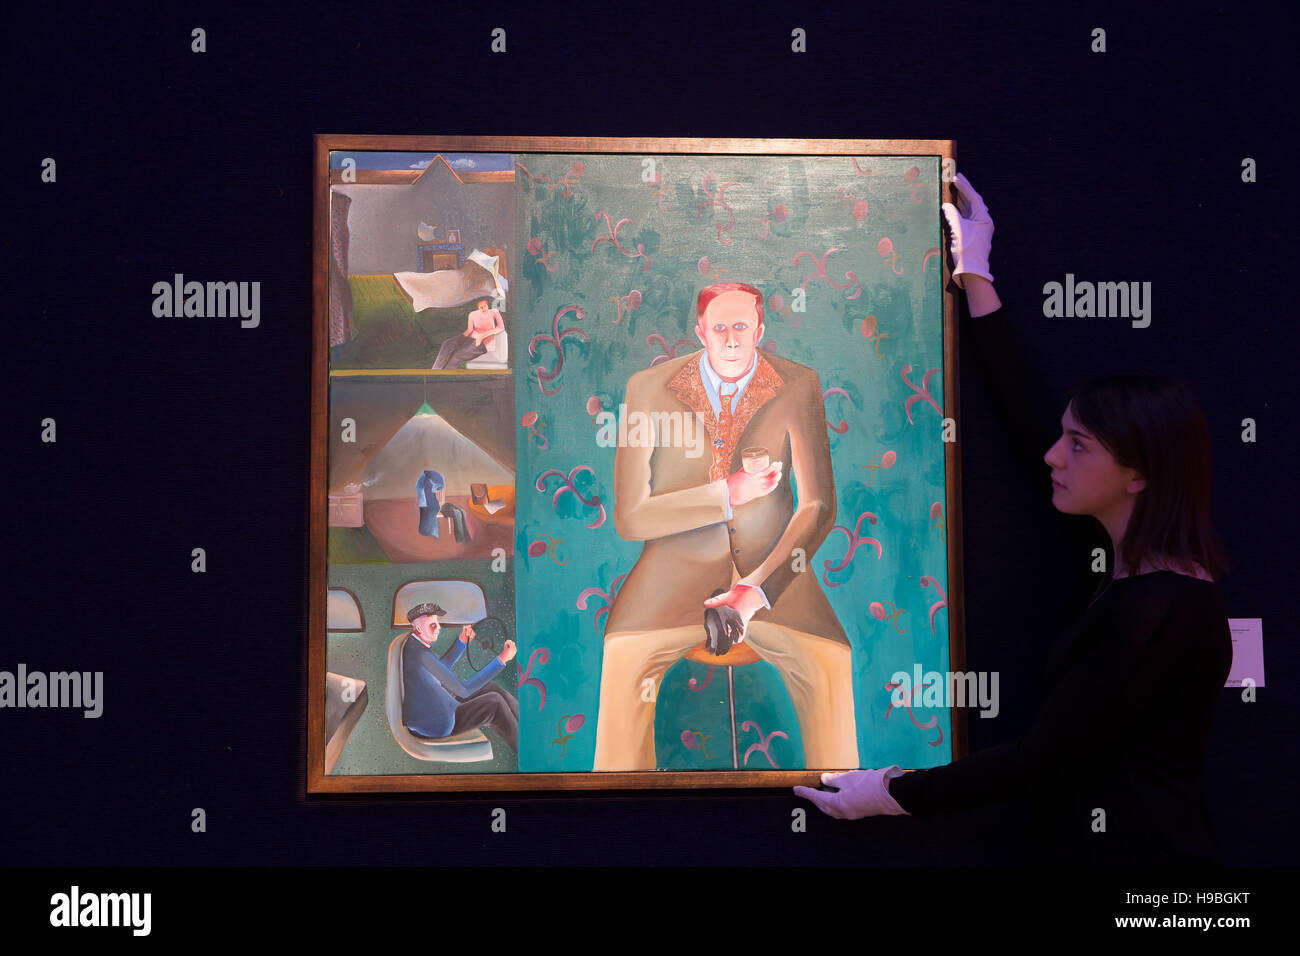 London, UK. 21st Nov, 2016. EAST MEETS WEST IN BHUPEN KHAKHAR'S ‘MAN IN PUB'at Bonhams BONHAMS Modern and contemporary South Asian art sale in London Credit:  Keith Larby/Alamy Live News Stock Photo